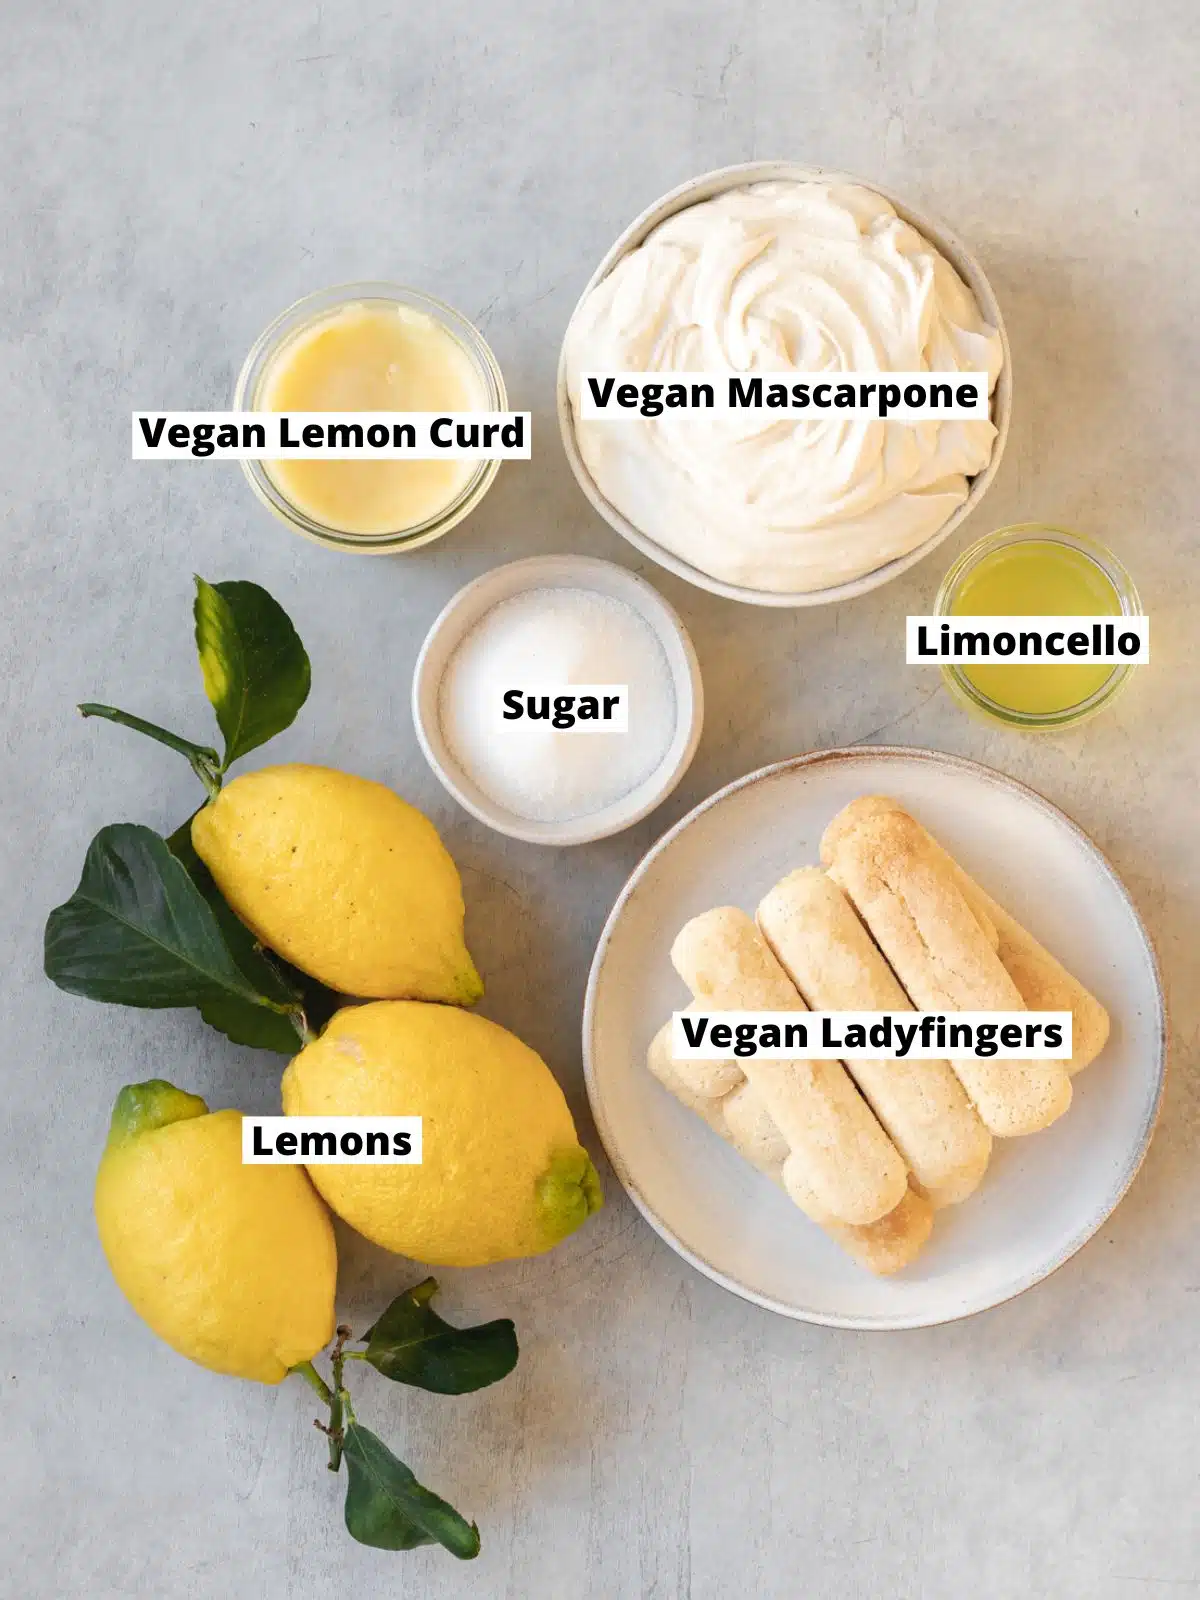 ingredients for vegan limoncello tiramisu measured out in bowls on a grey surface.